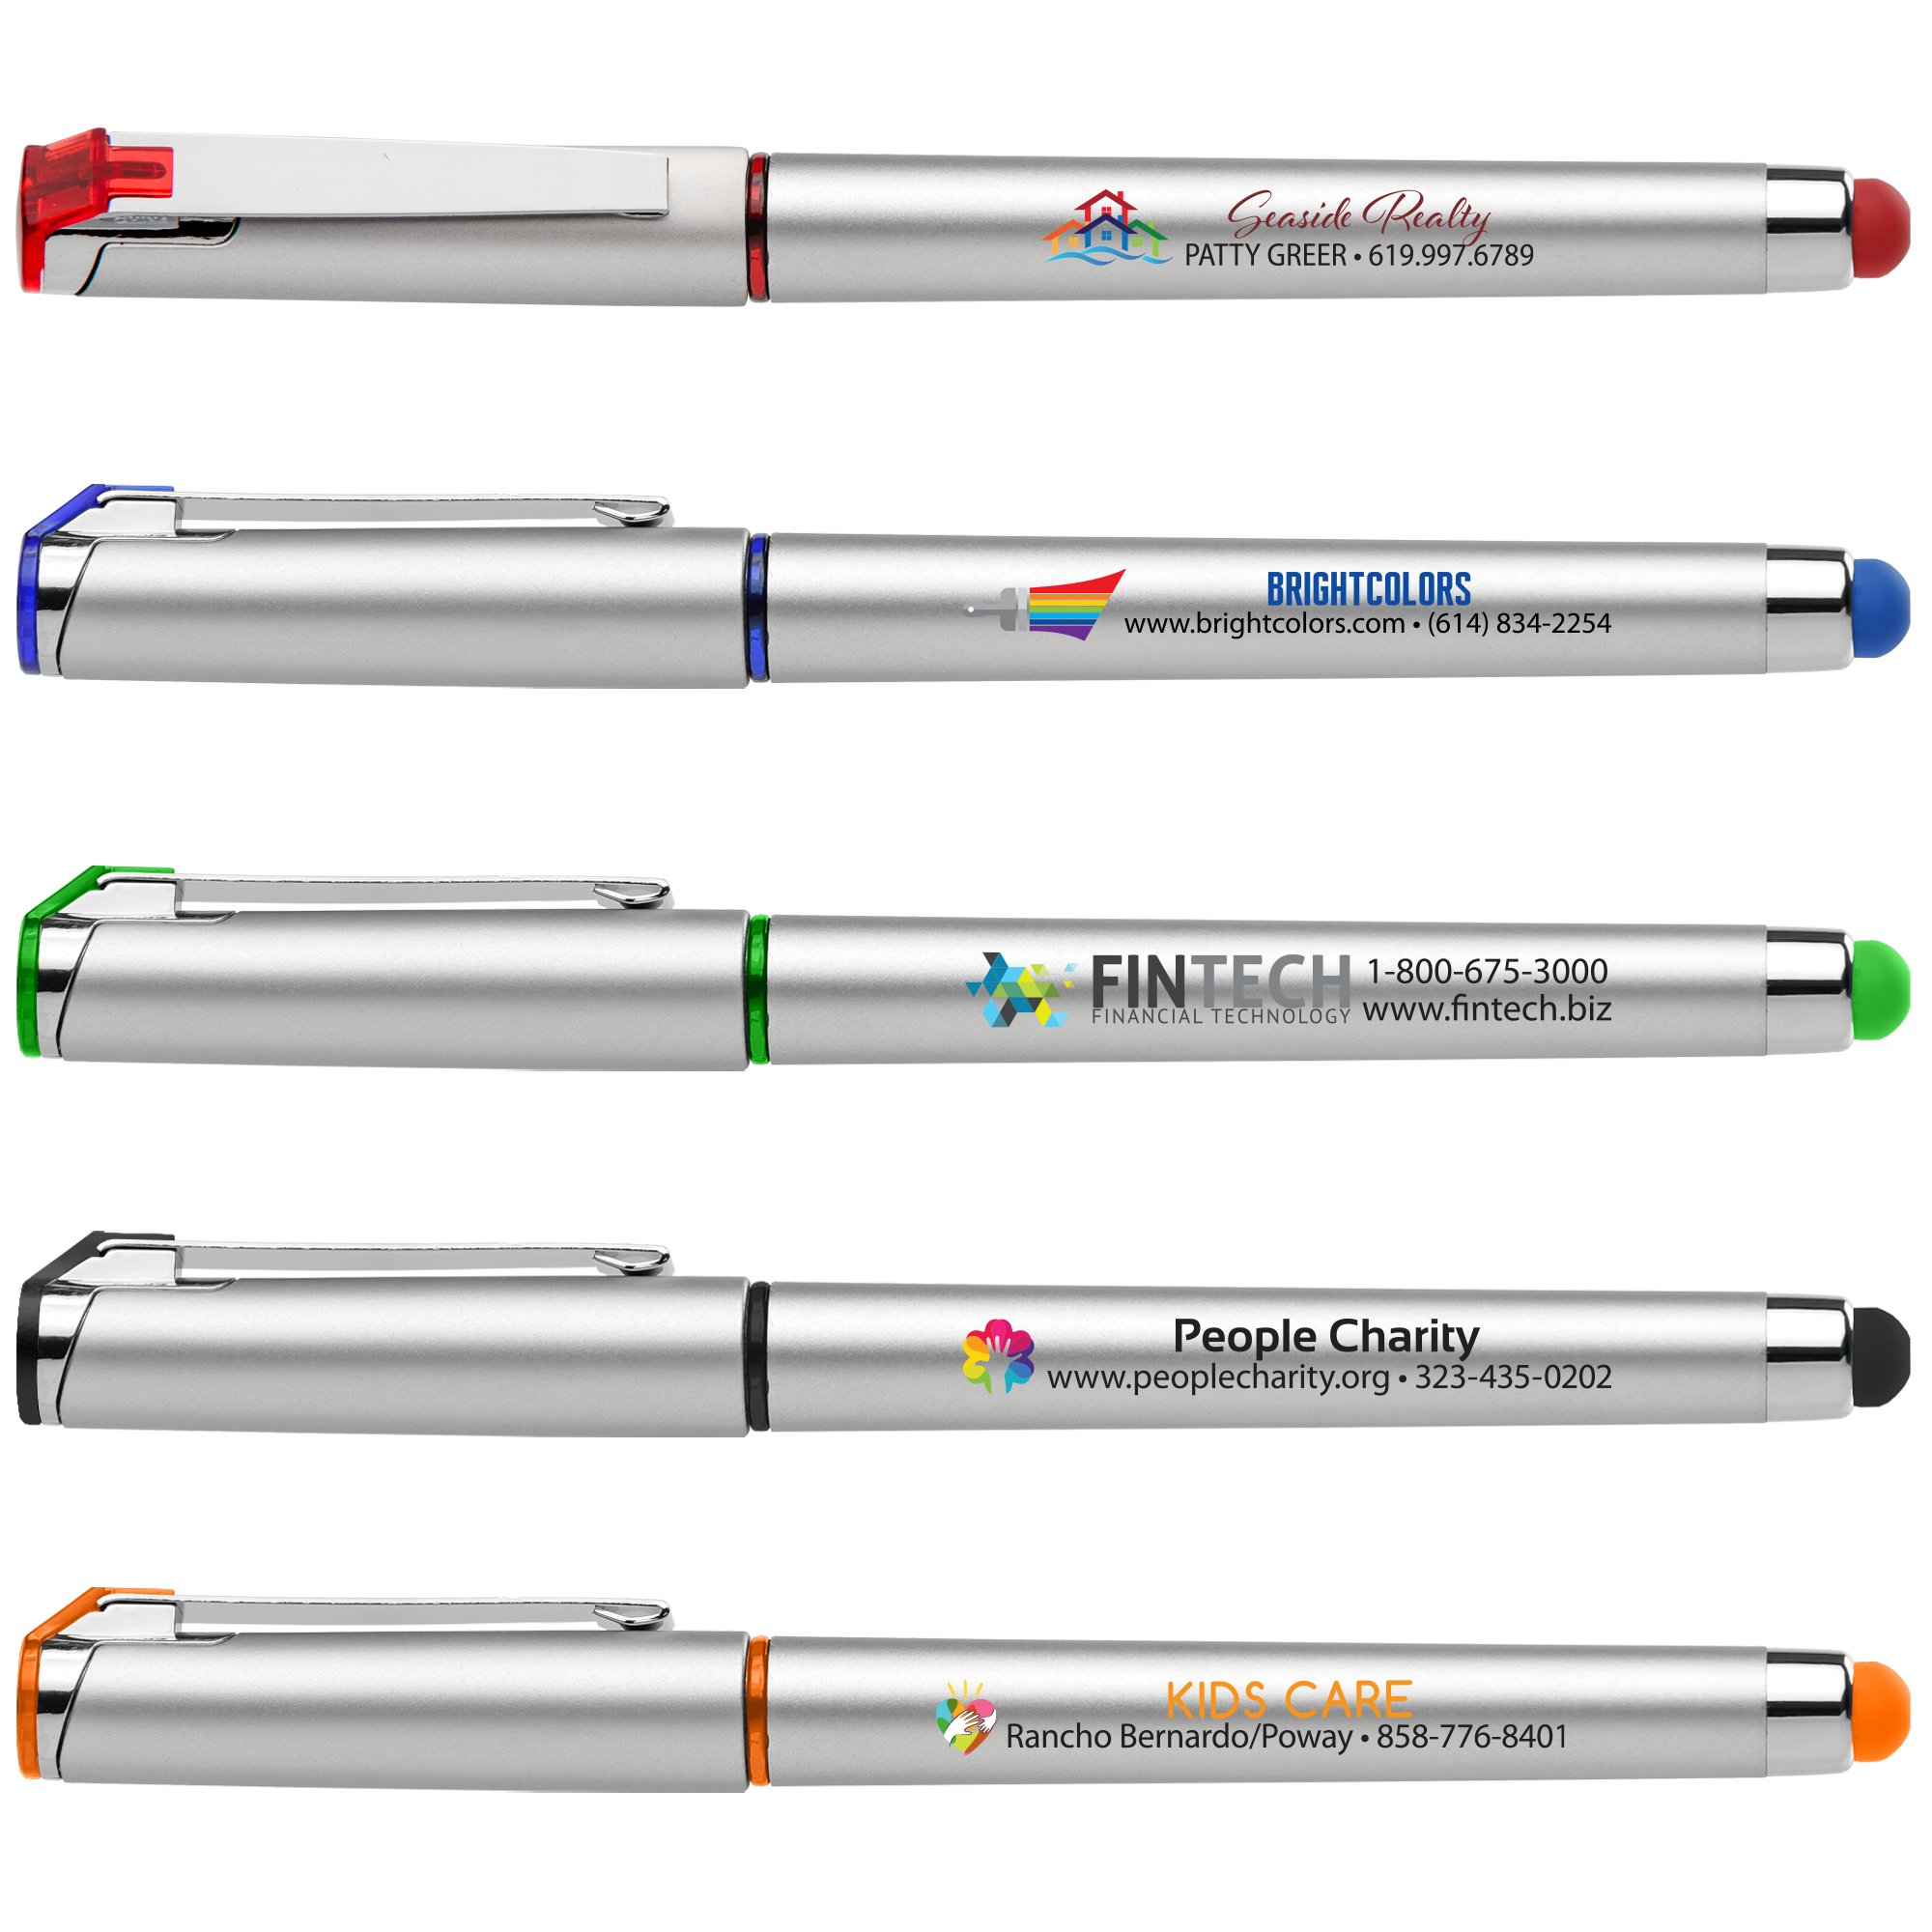 Clearance Promotional Items: No Setup Fees - Up to 70% OFF